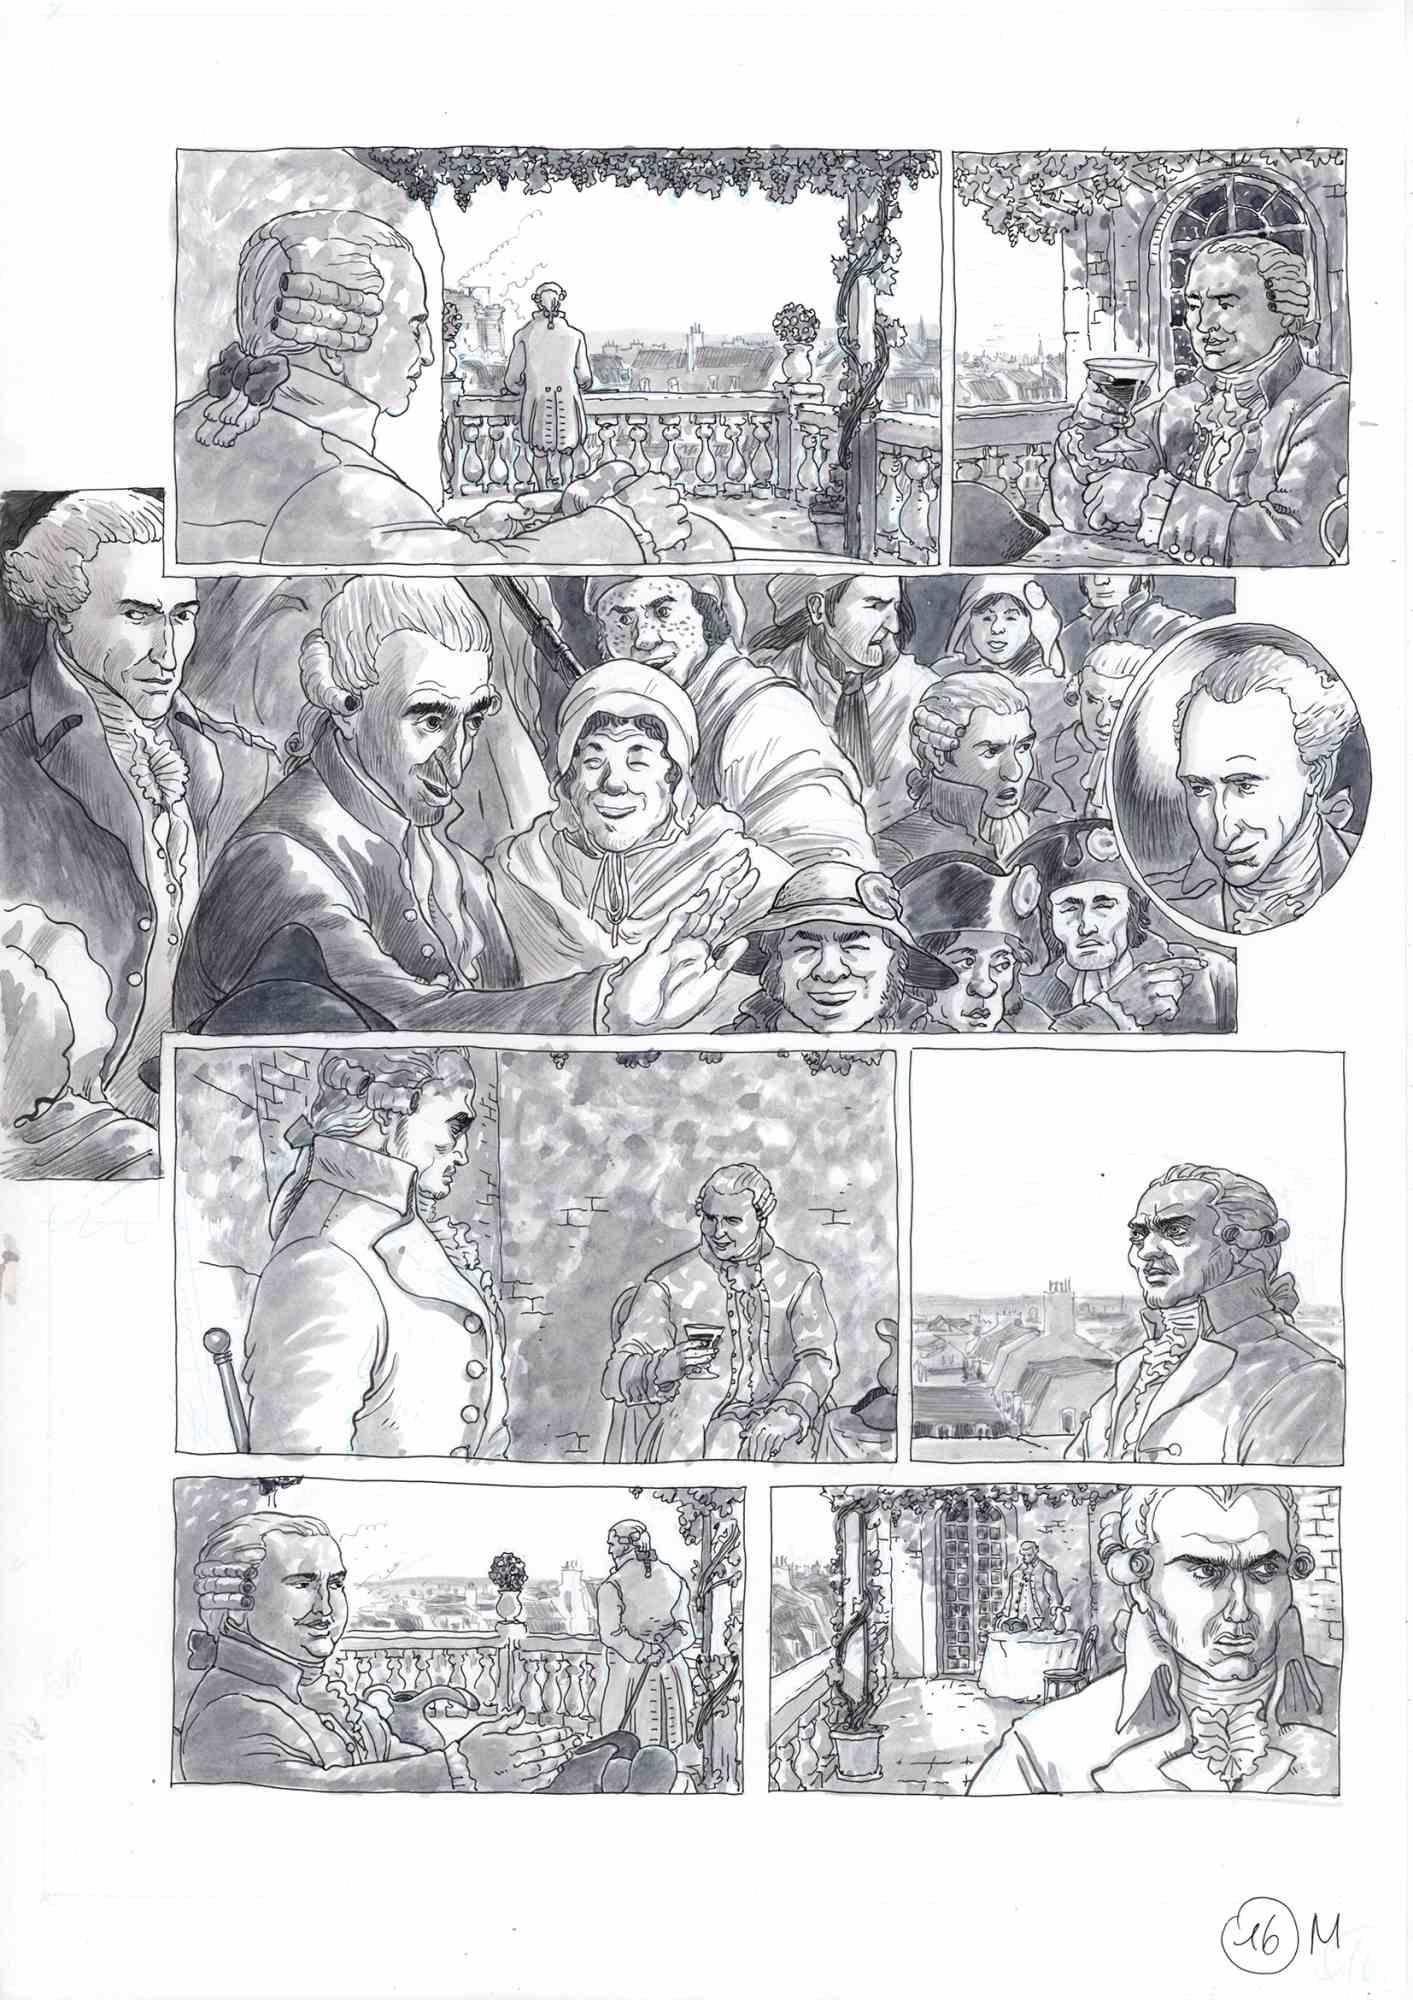 This work entitled "Beaumarchais speaks about Bailly" is a comic board belonging to the graphic novel published by Glènat Edition in 2019 "1789 - La mort d'un monde". The work was made by Vincenzo Bizzarri between 2018 and 2019, total work duration